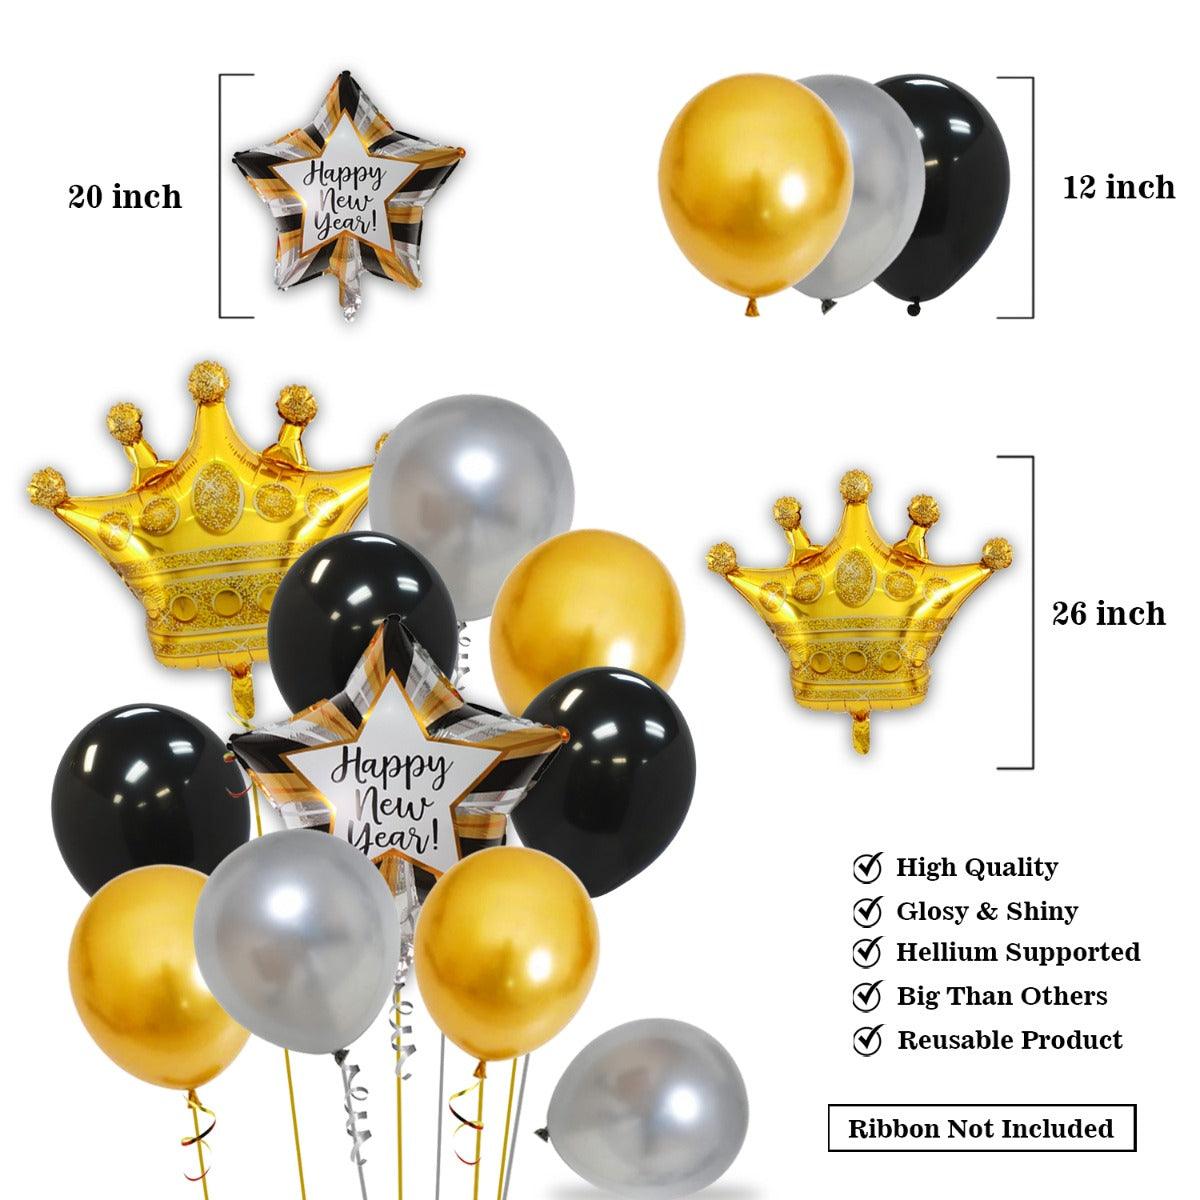 PartyCorp New Year Decoration Kit Combo 44 Pcs - Gold, Silver Chrome Balloons, Black Latex Balloon, Gold Happy New Year Foil Banner, Gold Crown, Happy New Year Star, 2022 Digit Foil Balloons